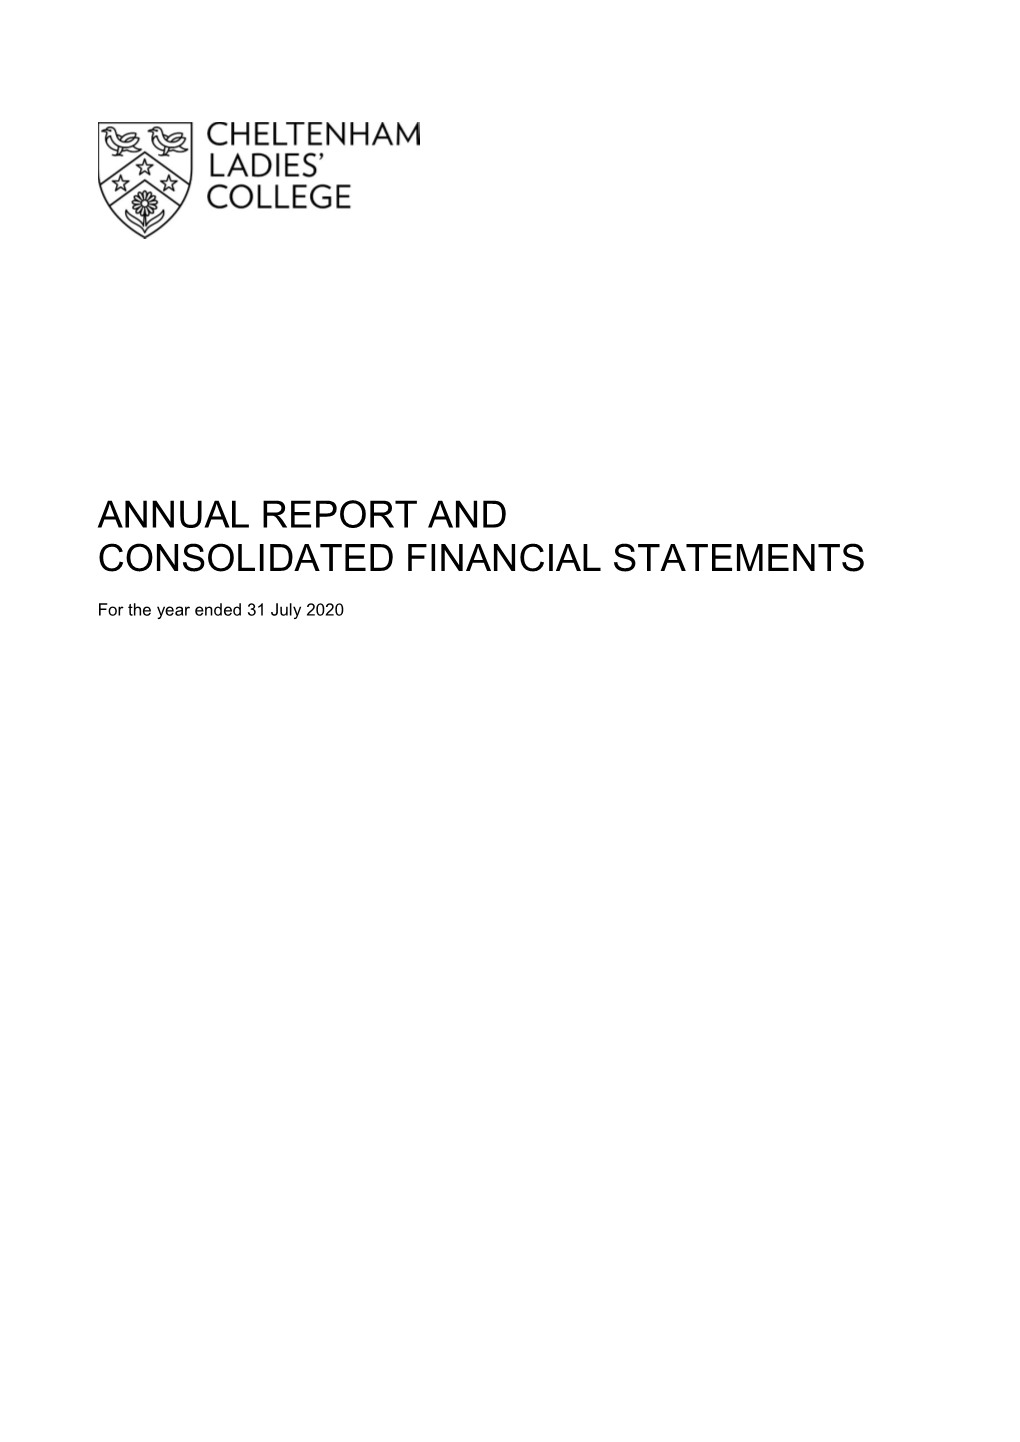 Annual Report and Consolidated Financial Statements